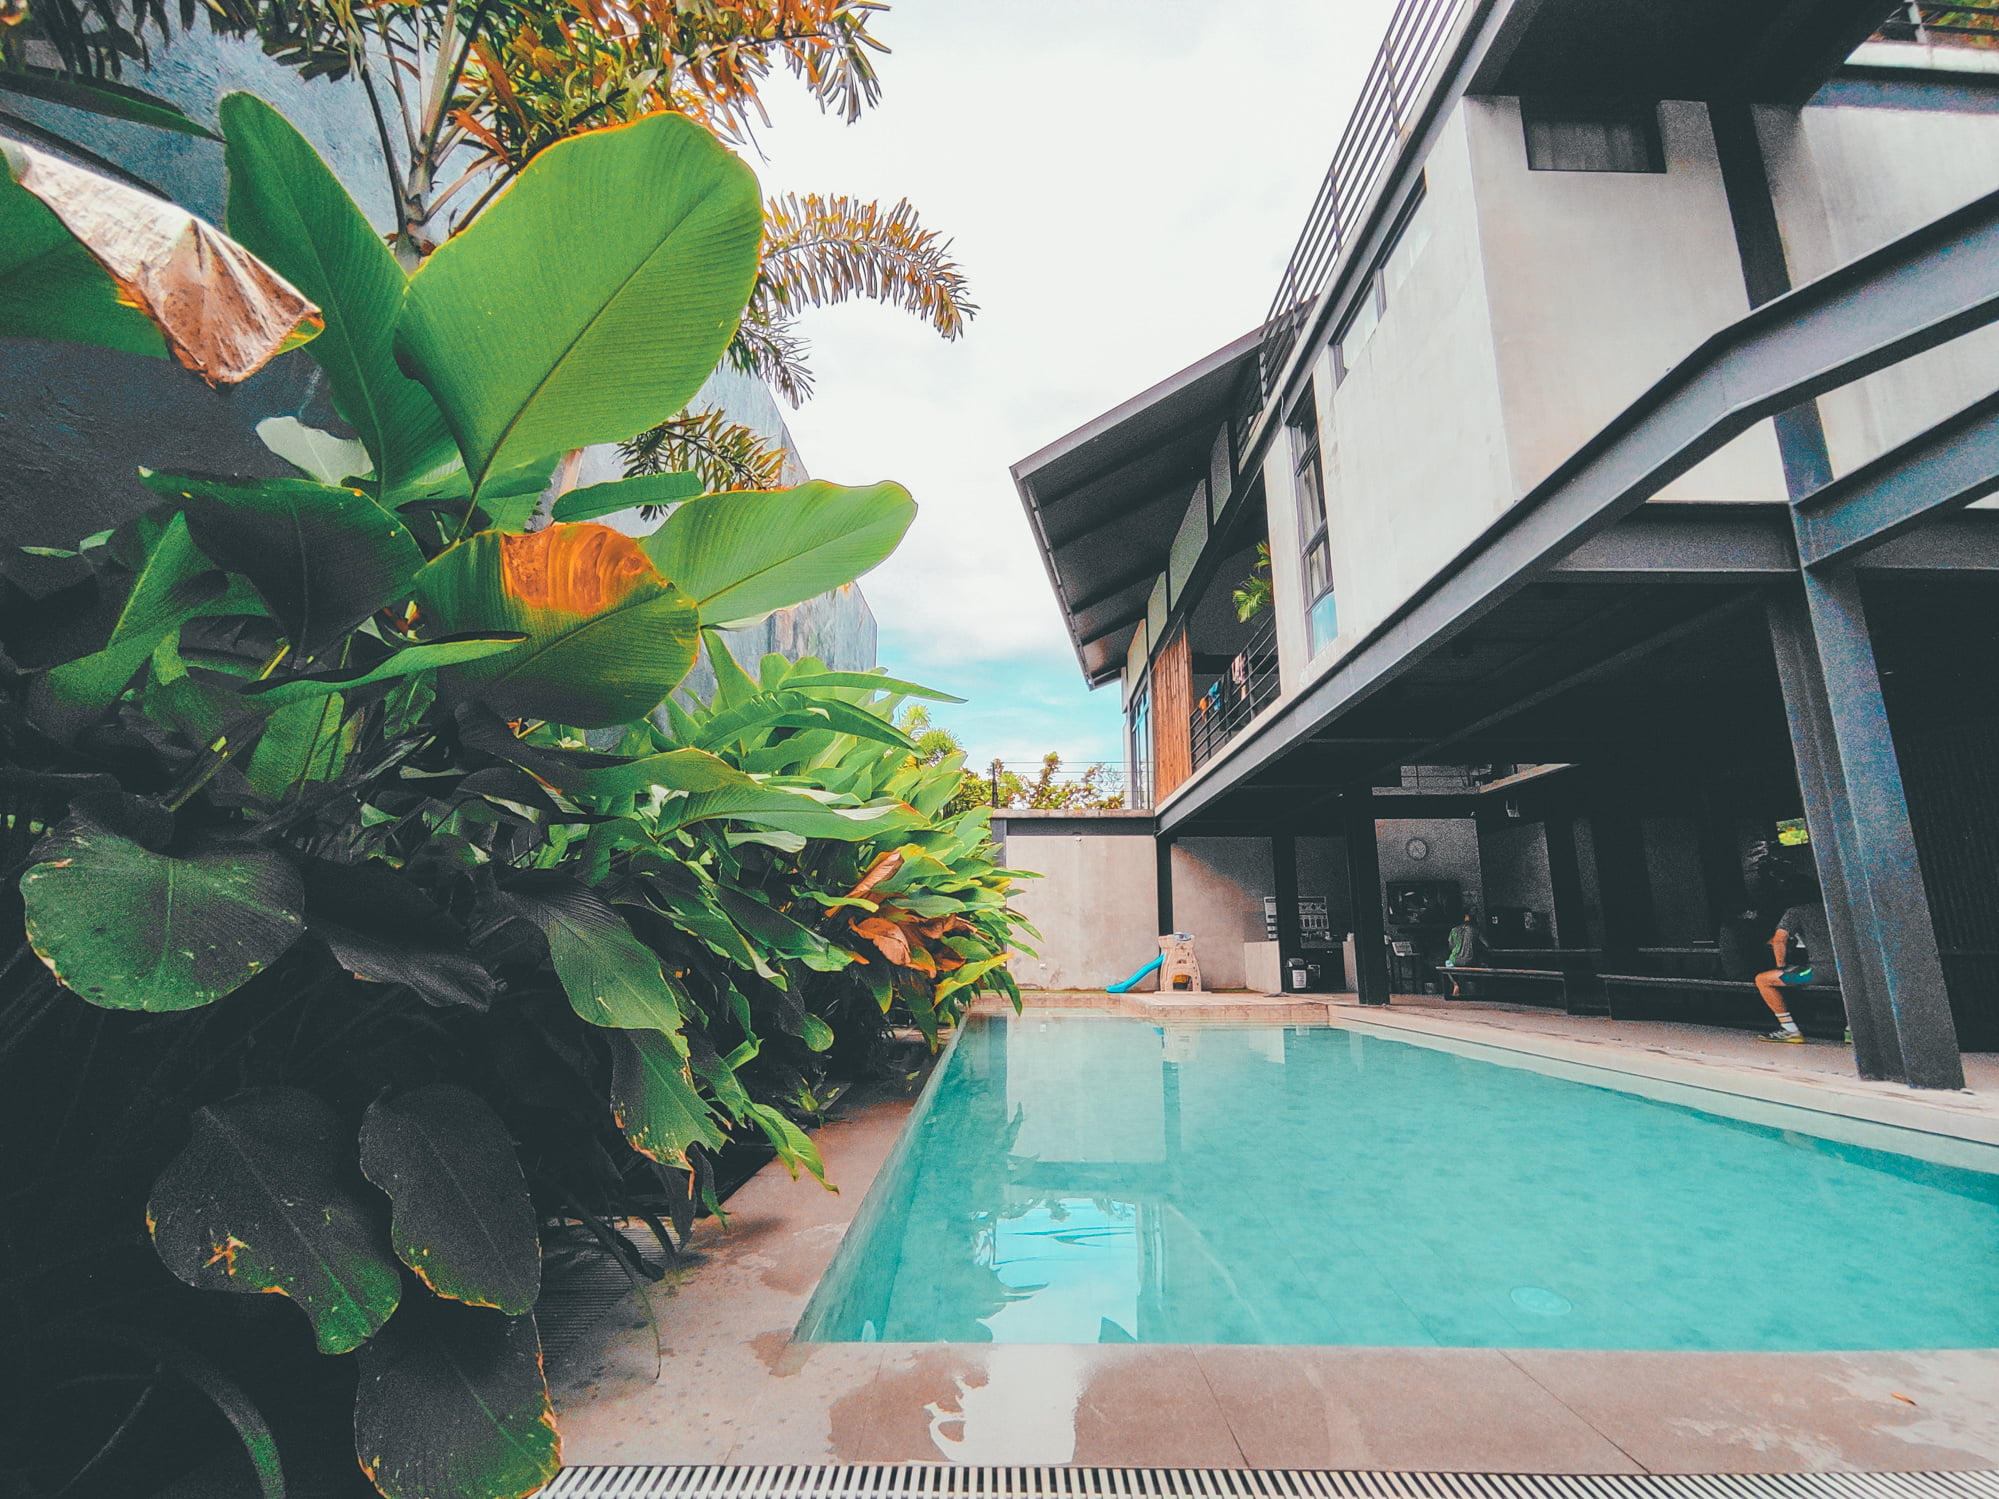 CASA TROPICA VILLAS: An Affordable and Instagram-worthy Modern Tropical Villa in Pansol